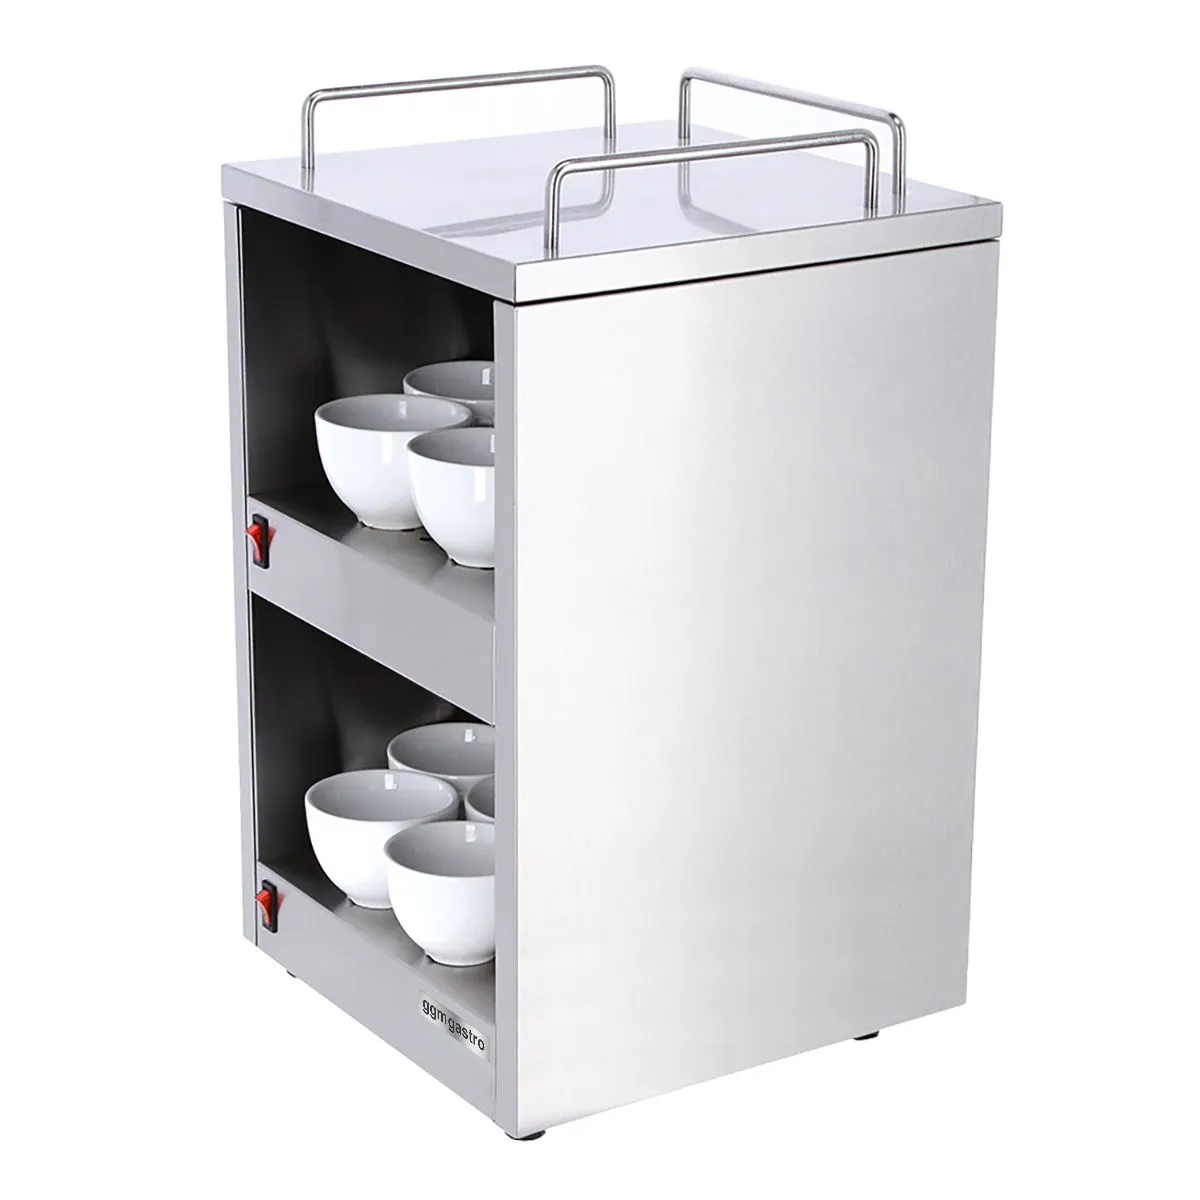 GGMGASTRO Cup warmer - with 2 shelves